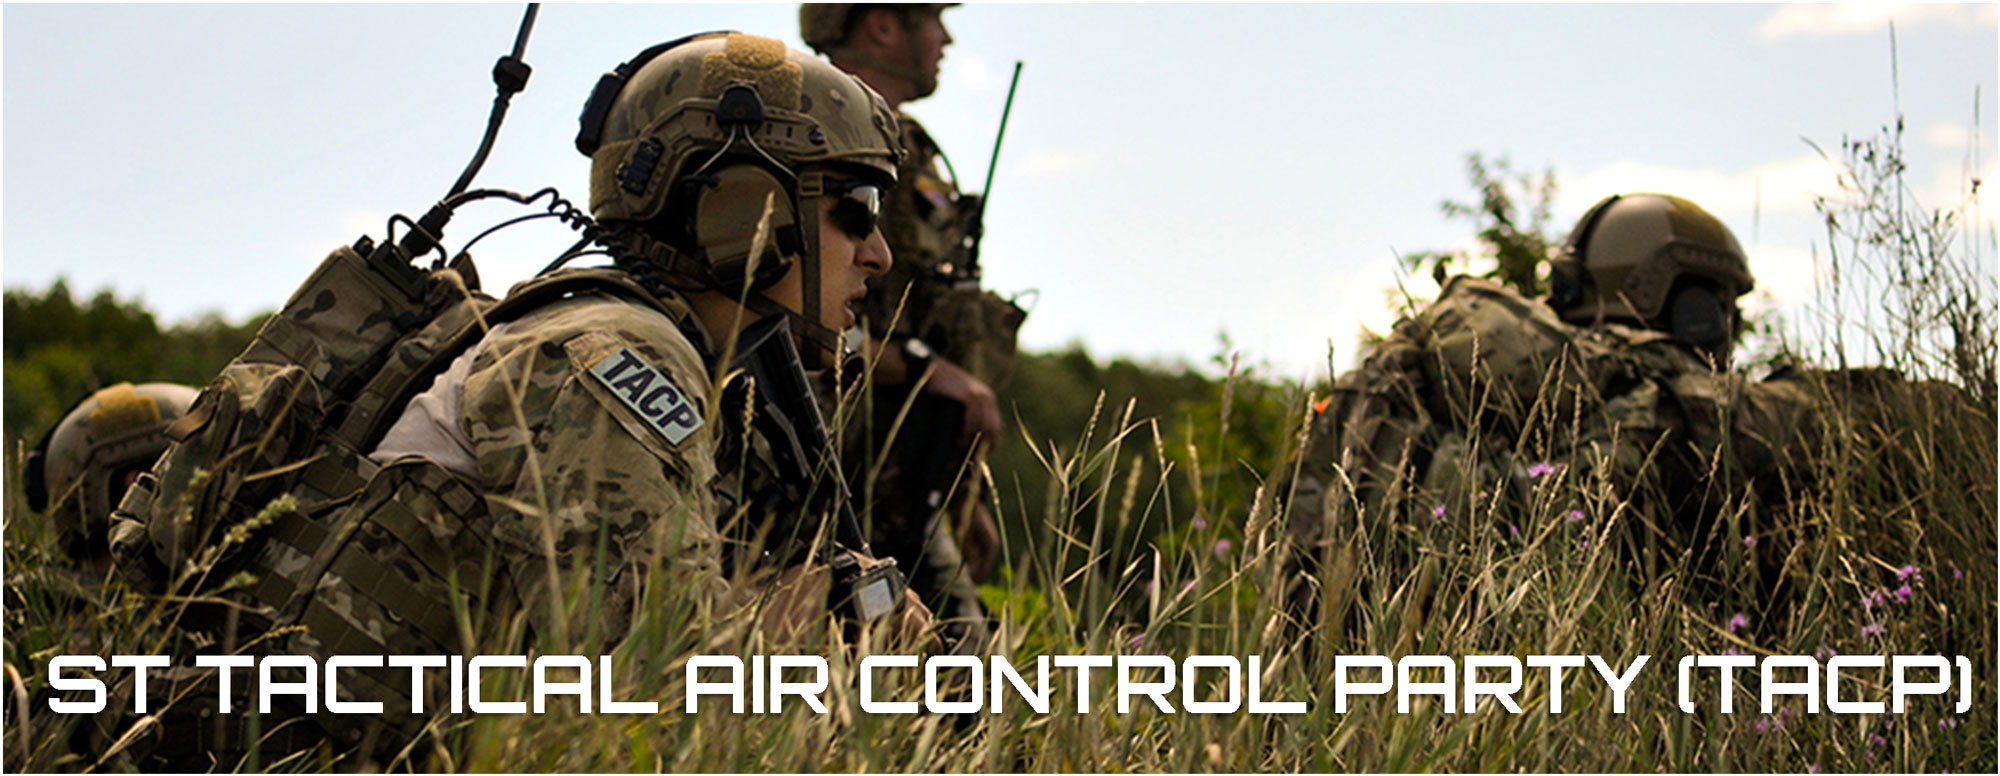 ST Tactical Air Control Party TACP